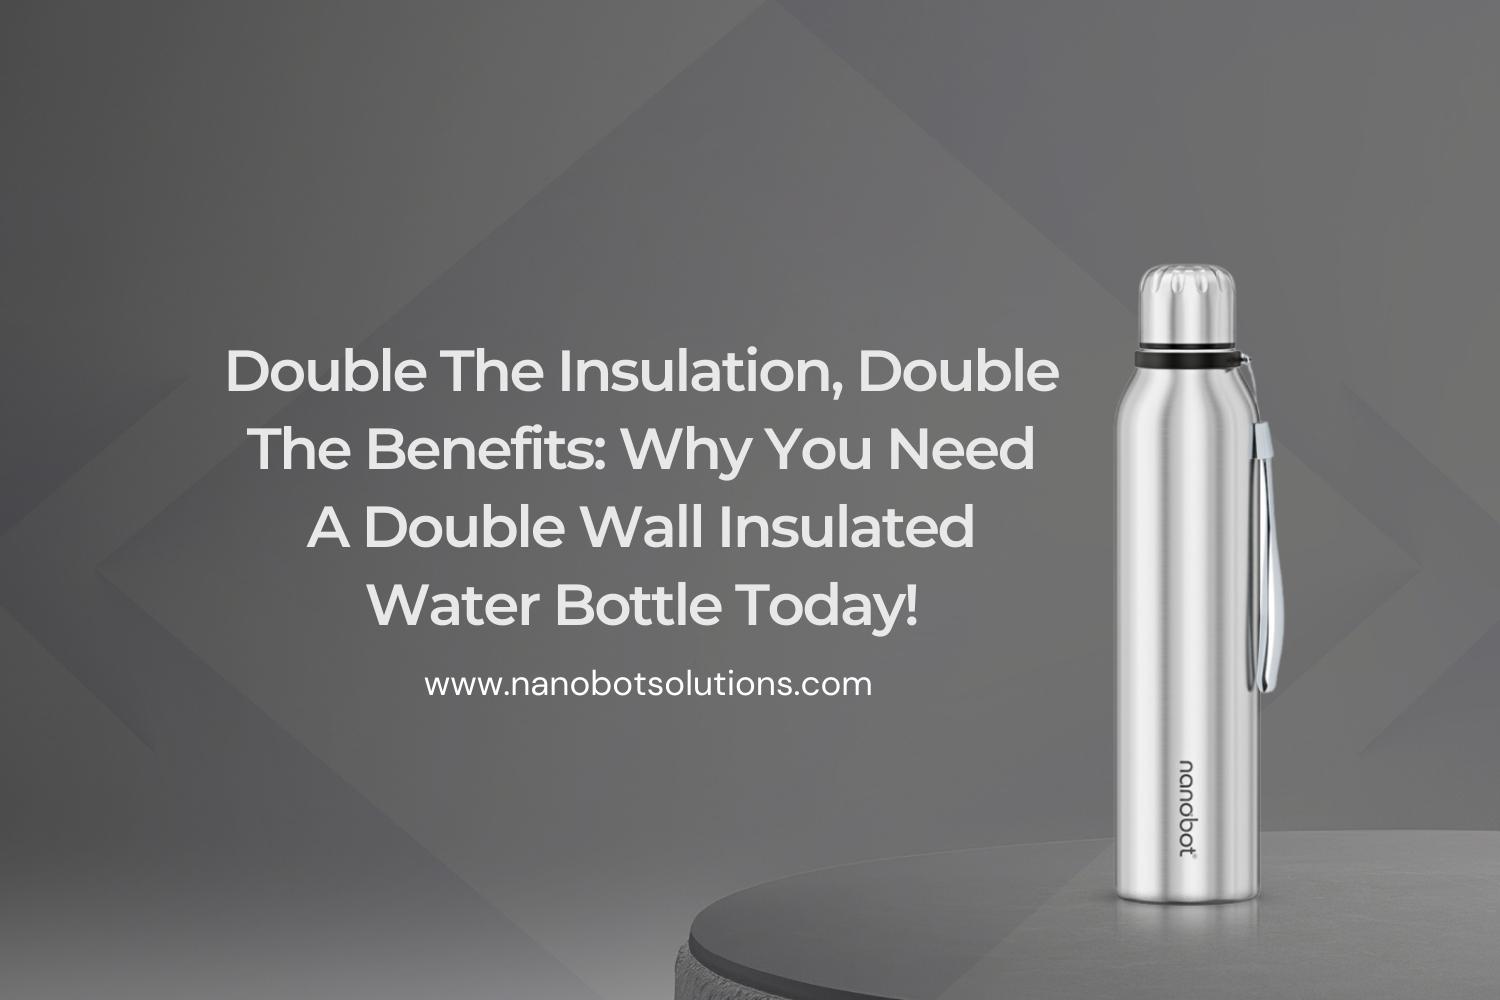 Double The Insulation Double The Benefits Why You Need A Double Wall Insulated Water Bottle Today | Nanobot